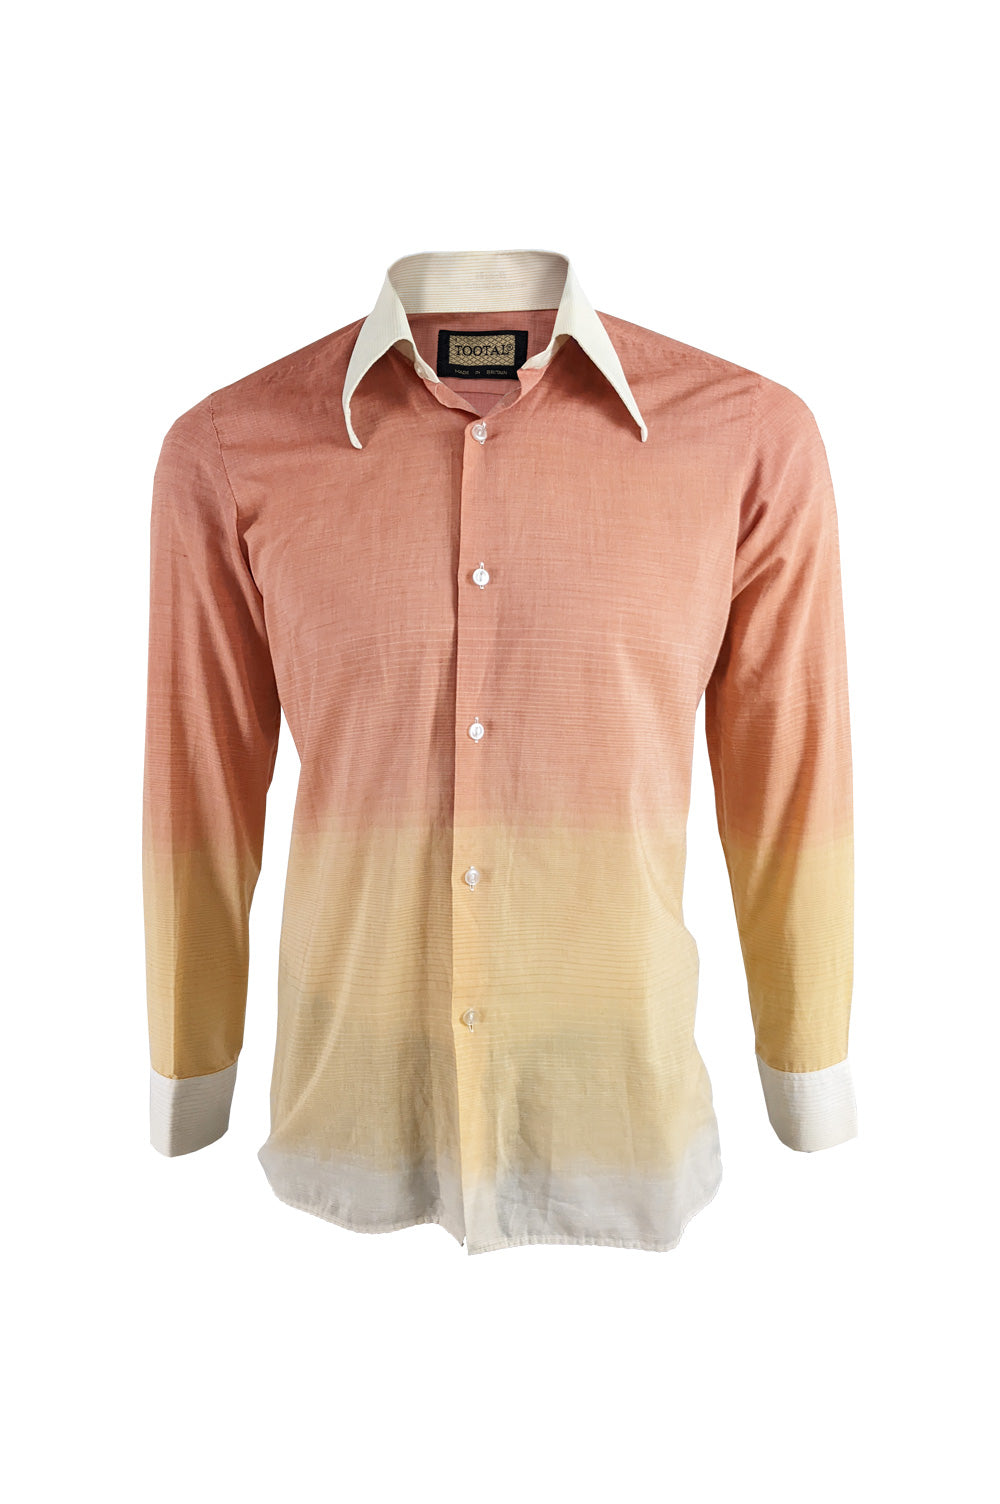 Tootal Vintage Mens Long Sleeve Shirt, 1970s